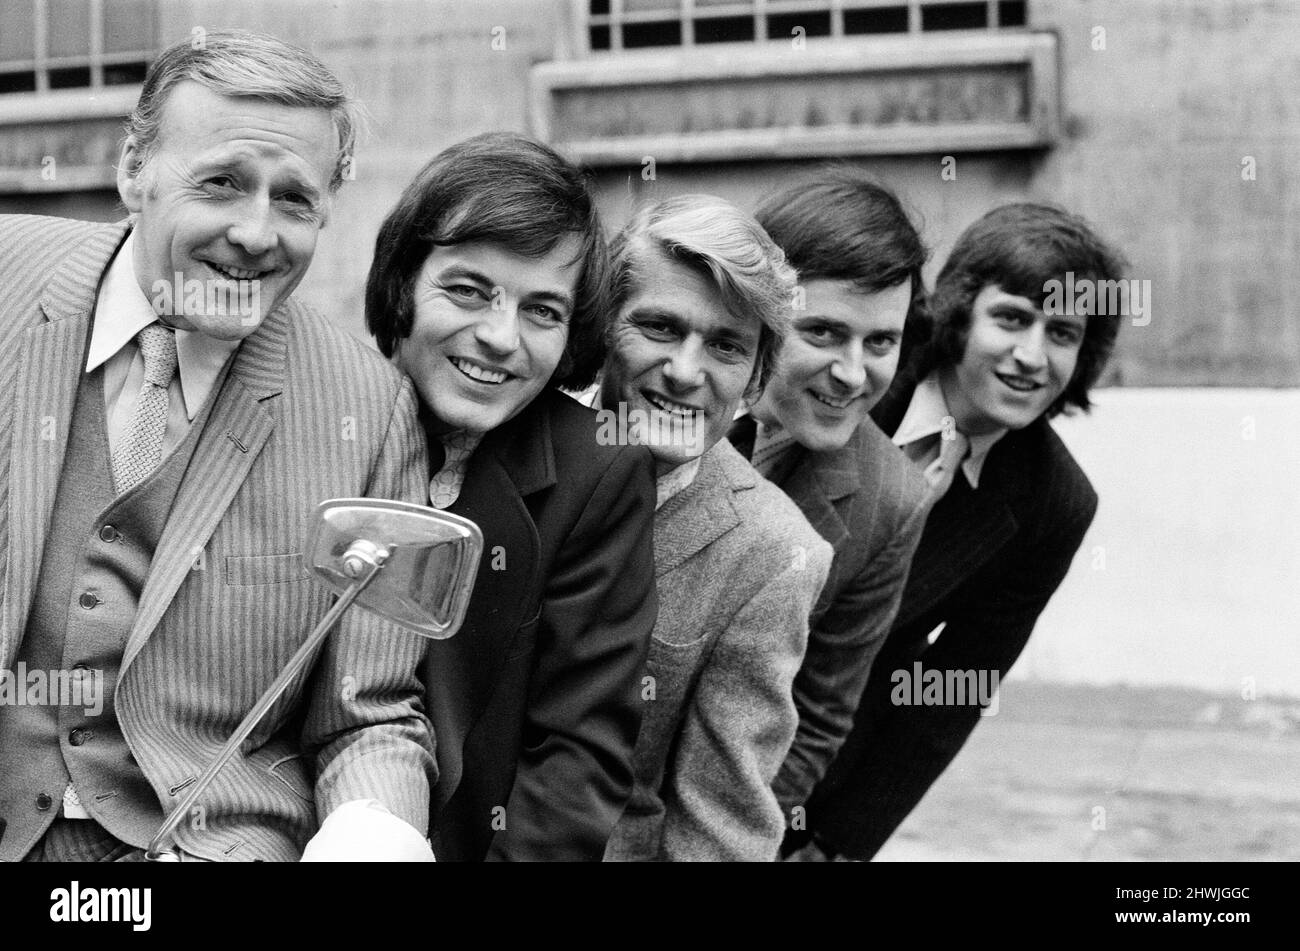 Five BBC Radio DJ's will be having a very happy New Year because they have just signed the longest BBC contracts in history - for three years, which starts on January 1st 1972. The disc jockeys are Tony Blackburn, Pete Murray, Ed Stewart, Terry Wogan and Jimmy Young. Their contracts will run until December 31st 1974 and the five were described by the controller of Radio 1 & 2 as the 'strikers of the 1st eleven'. 14th December 1971. Stock Photo